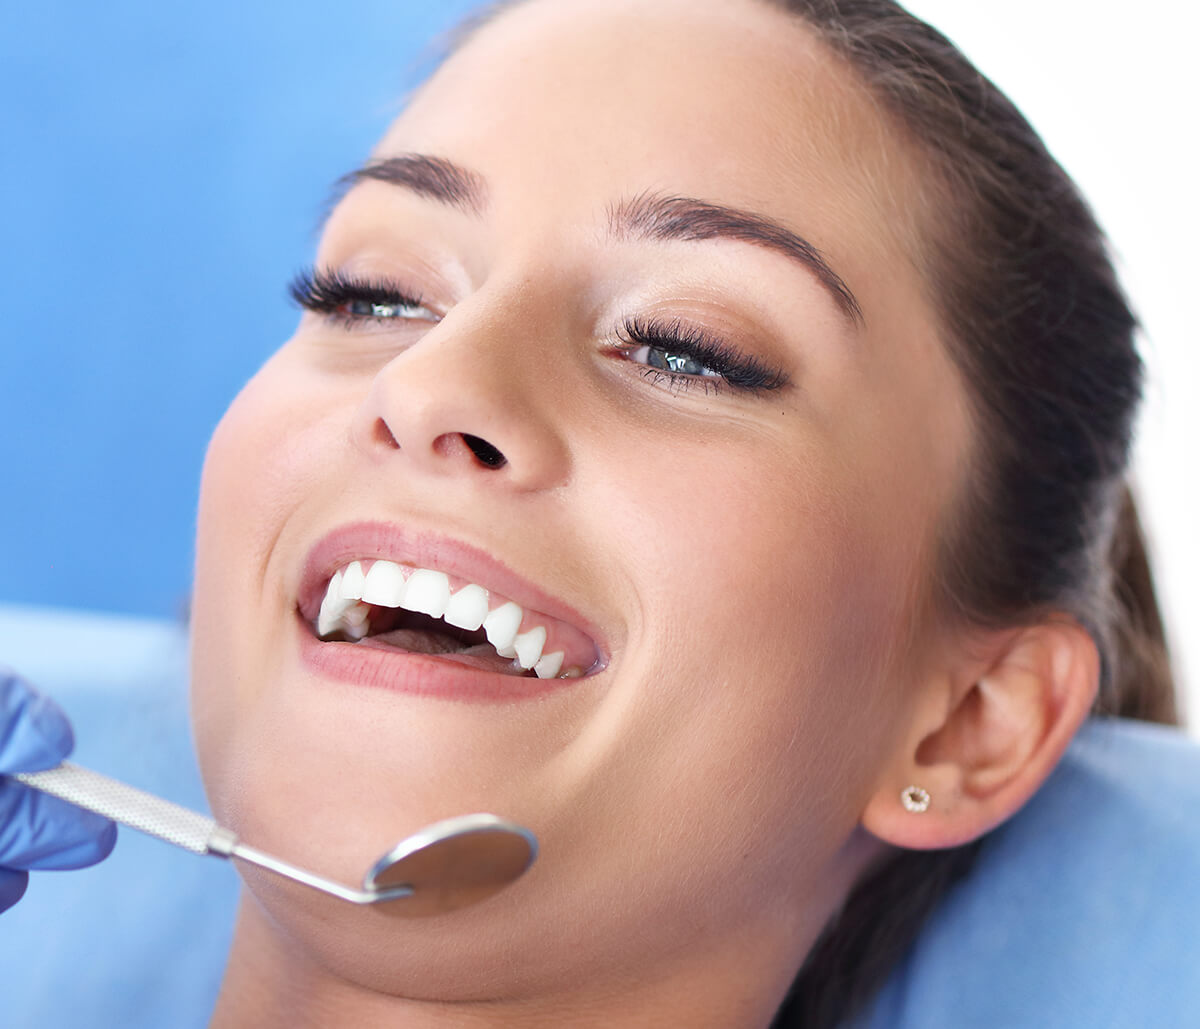 Ozone Therapy for Teeth at Virtue Dental Care in Yadkinville NC Area